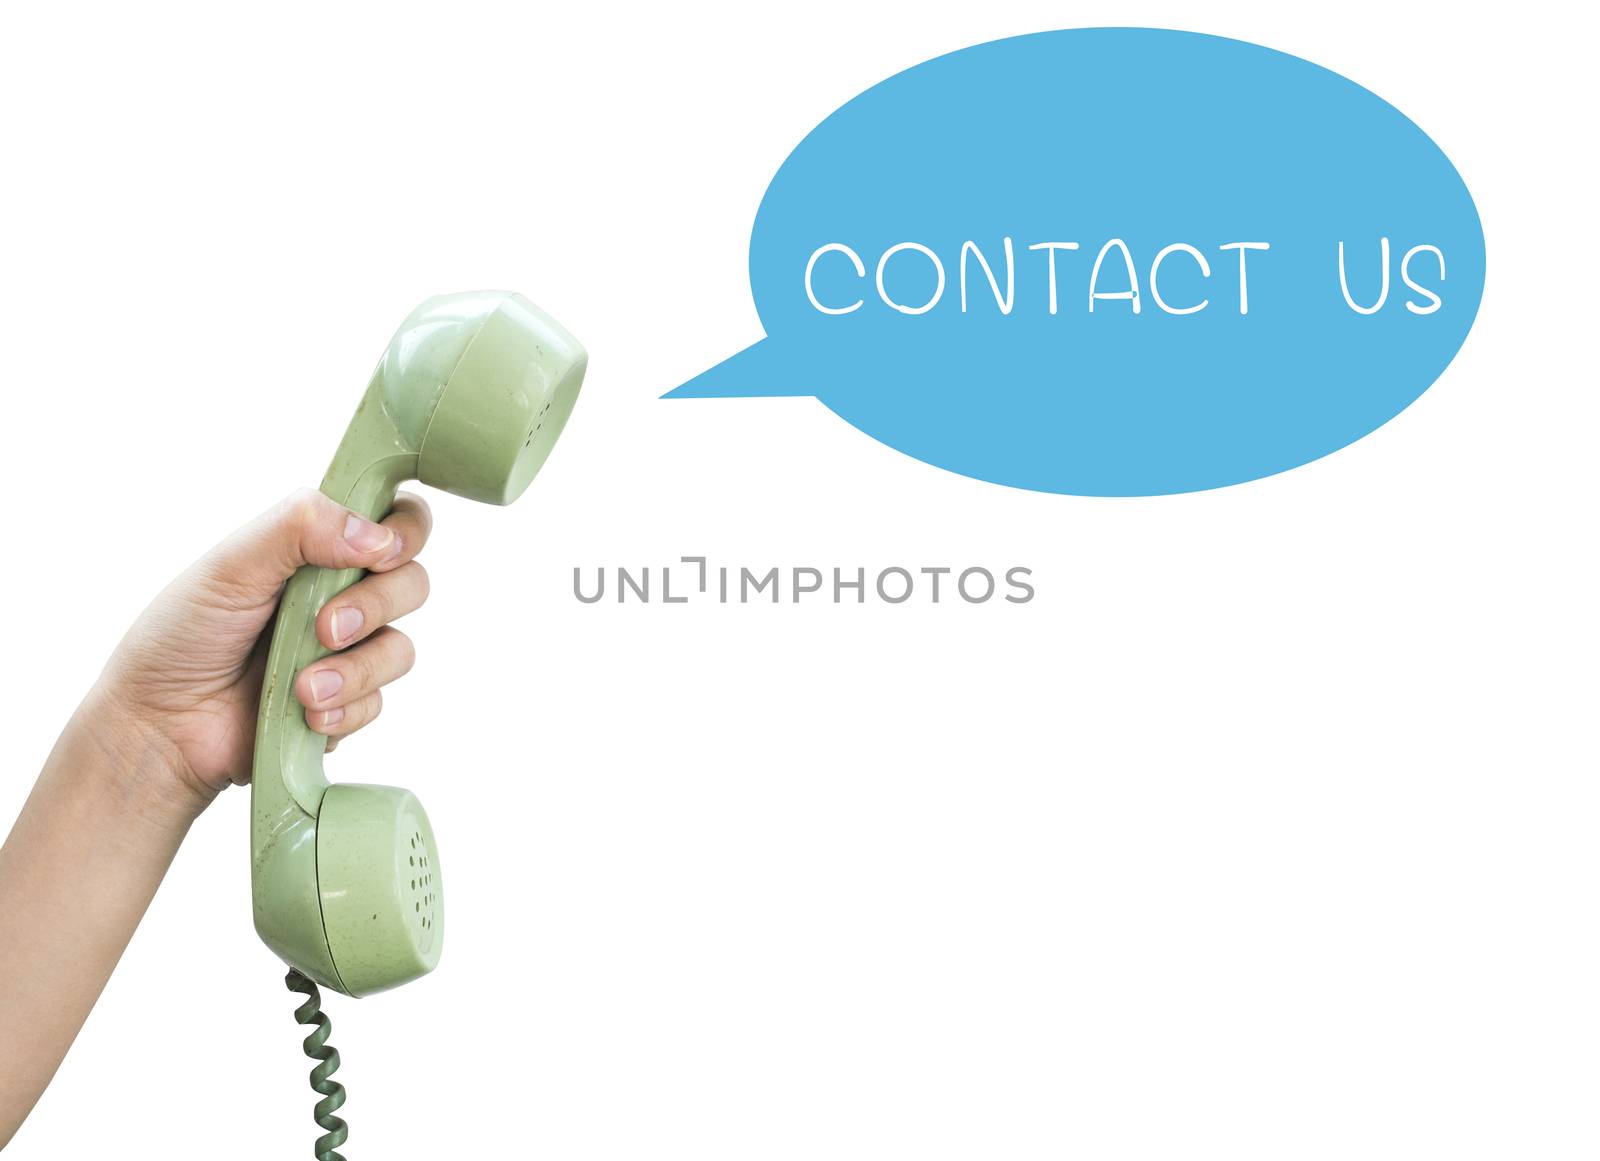 Contact Us. Hand hold vintage telephone isolated on white background